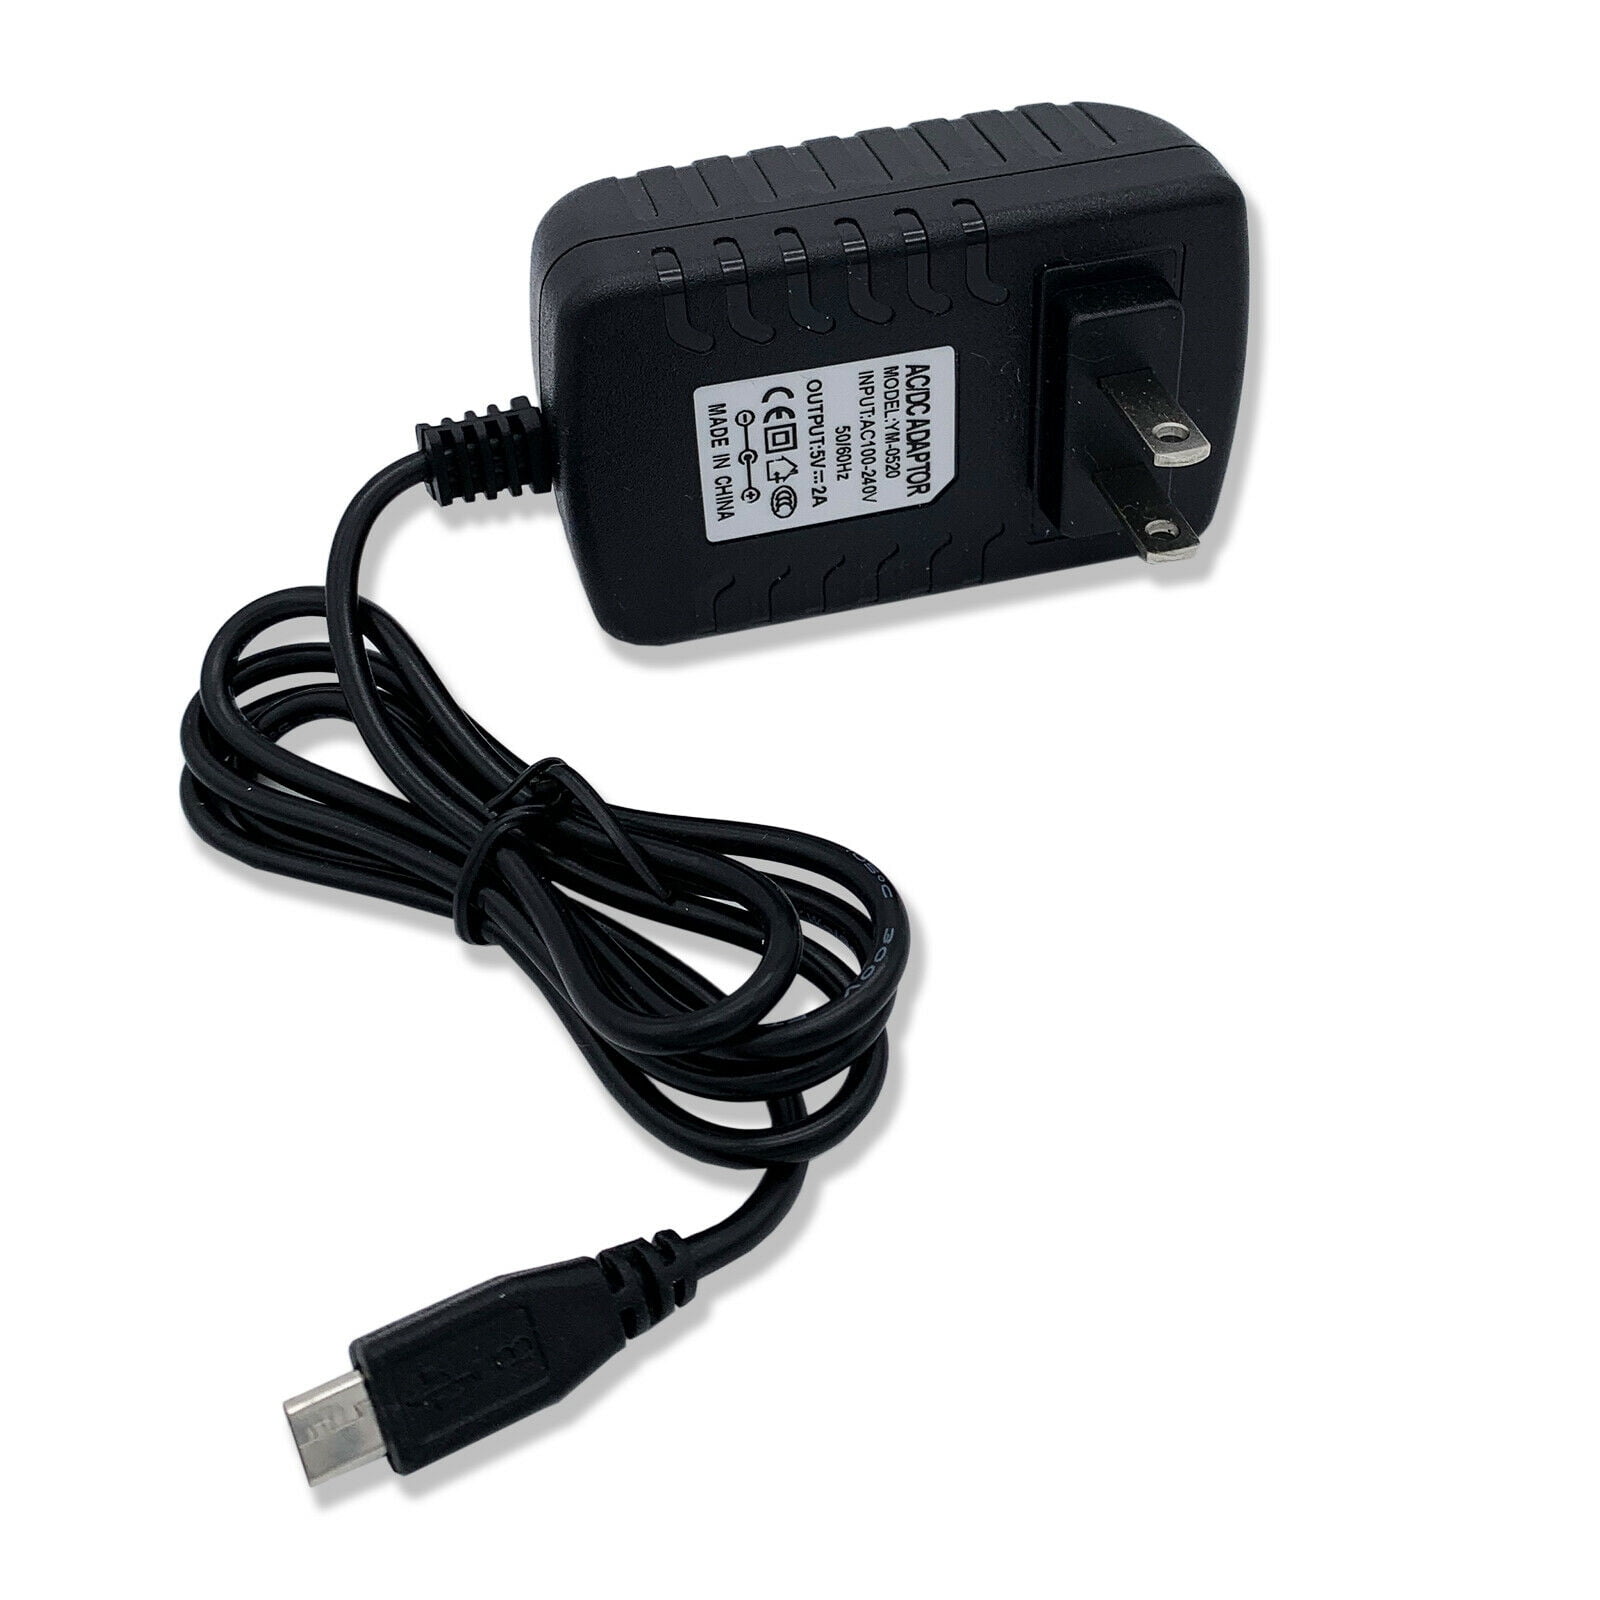 10W High Power AC Adapter Wall Charger for Lenovo ThinkPad Tablet 1838 1839 10.1